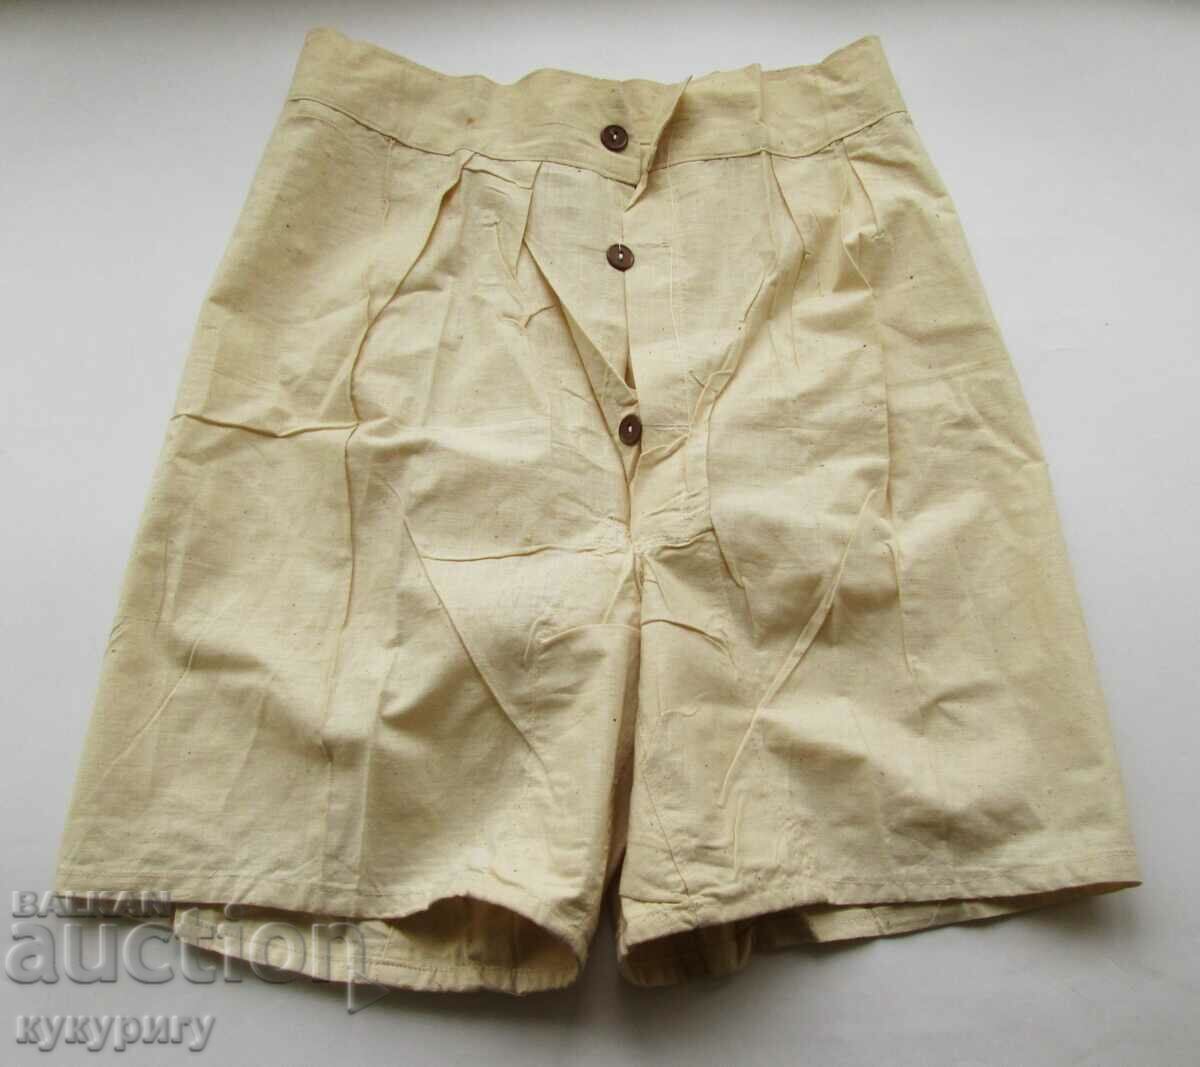 Old underwear shorts from a royal military uniform WW2